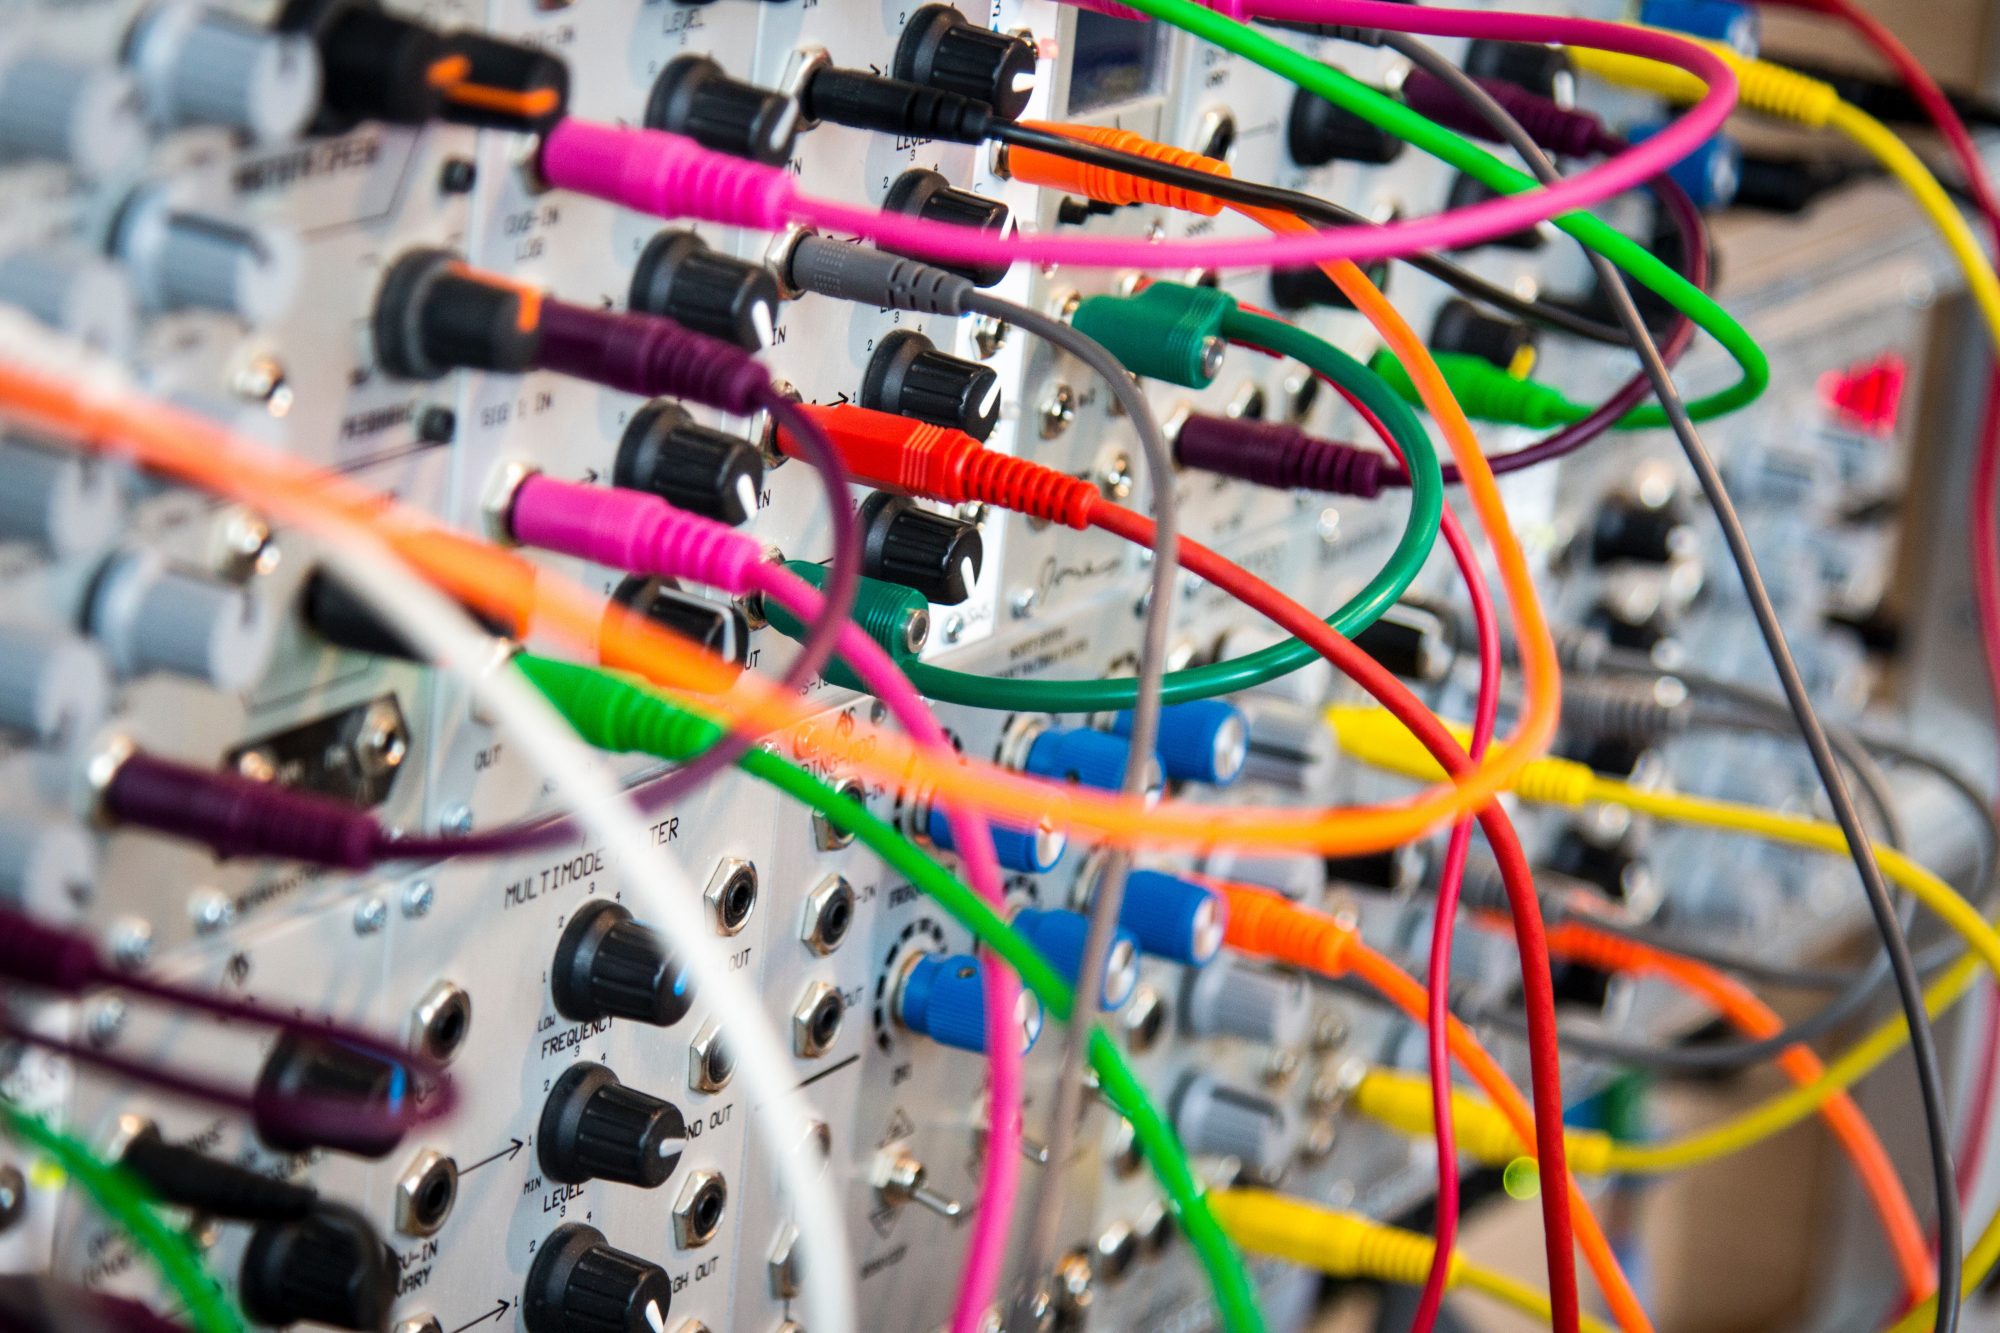 Close-up, shallow-focus photo of a switch board with colorful knobs and wires